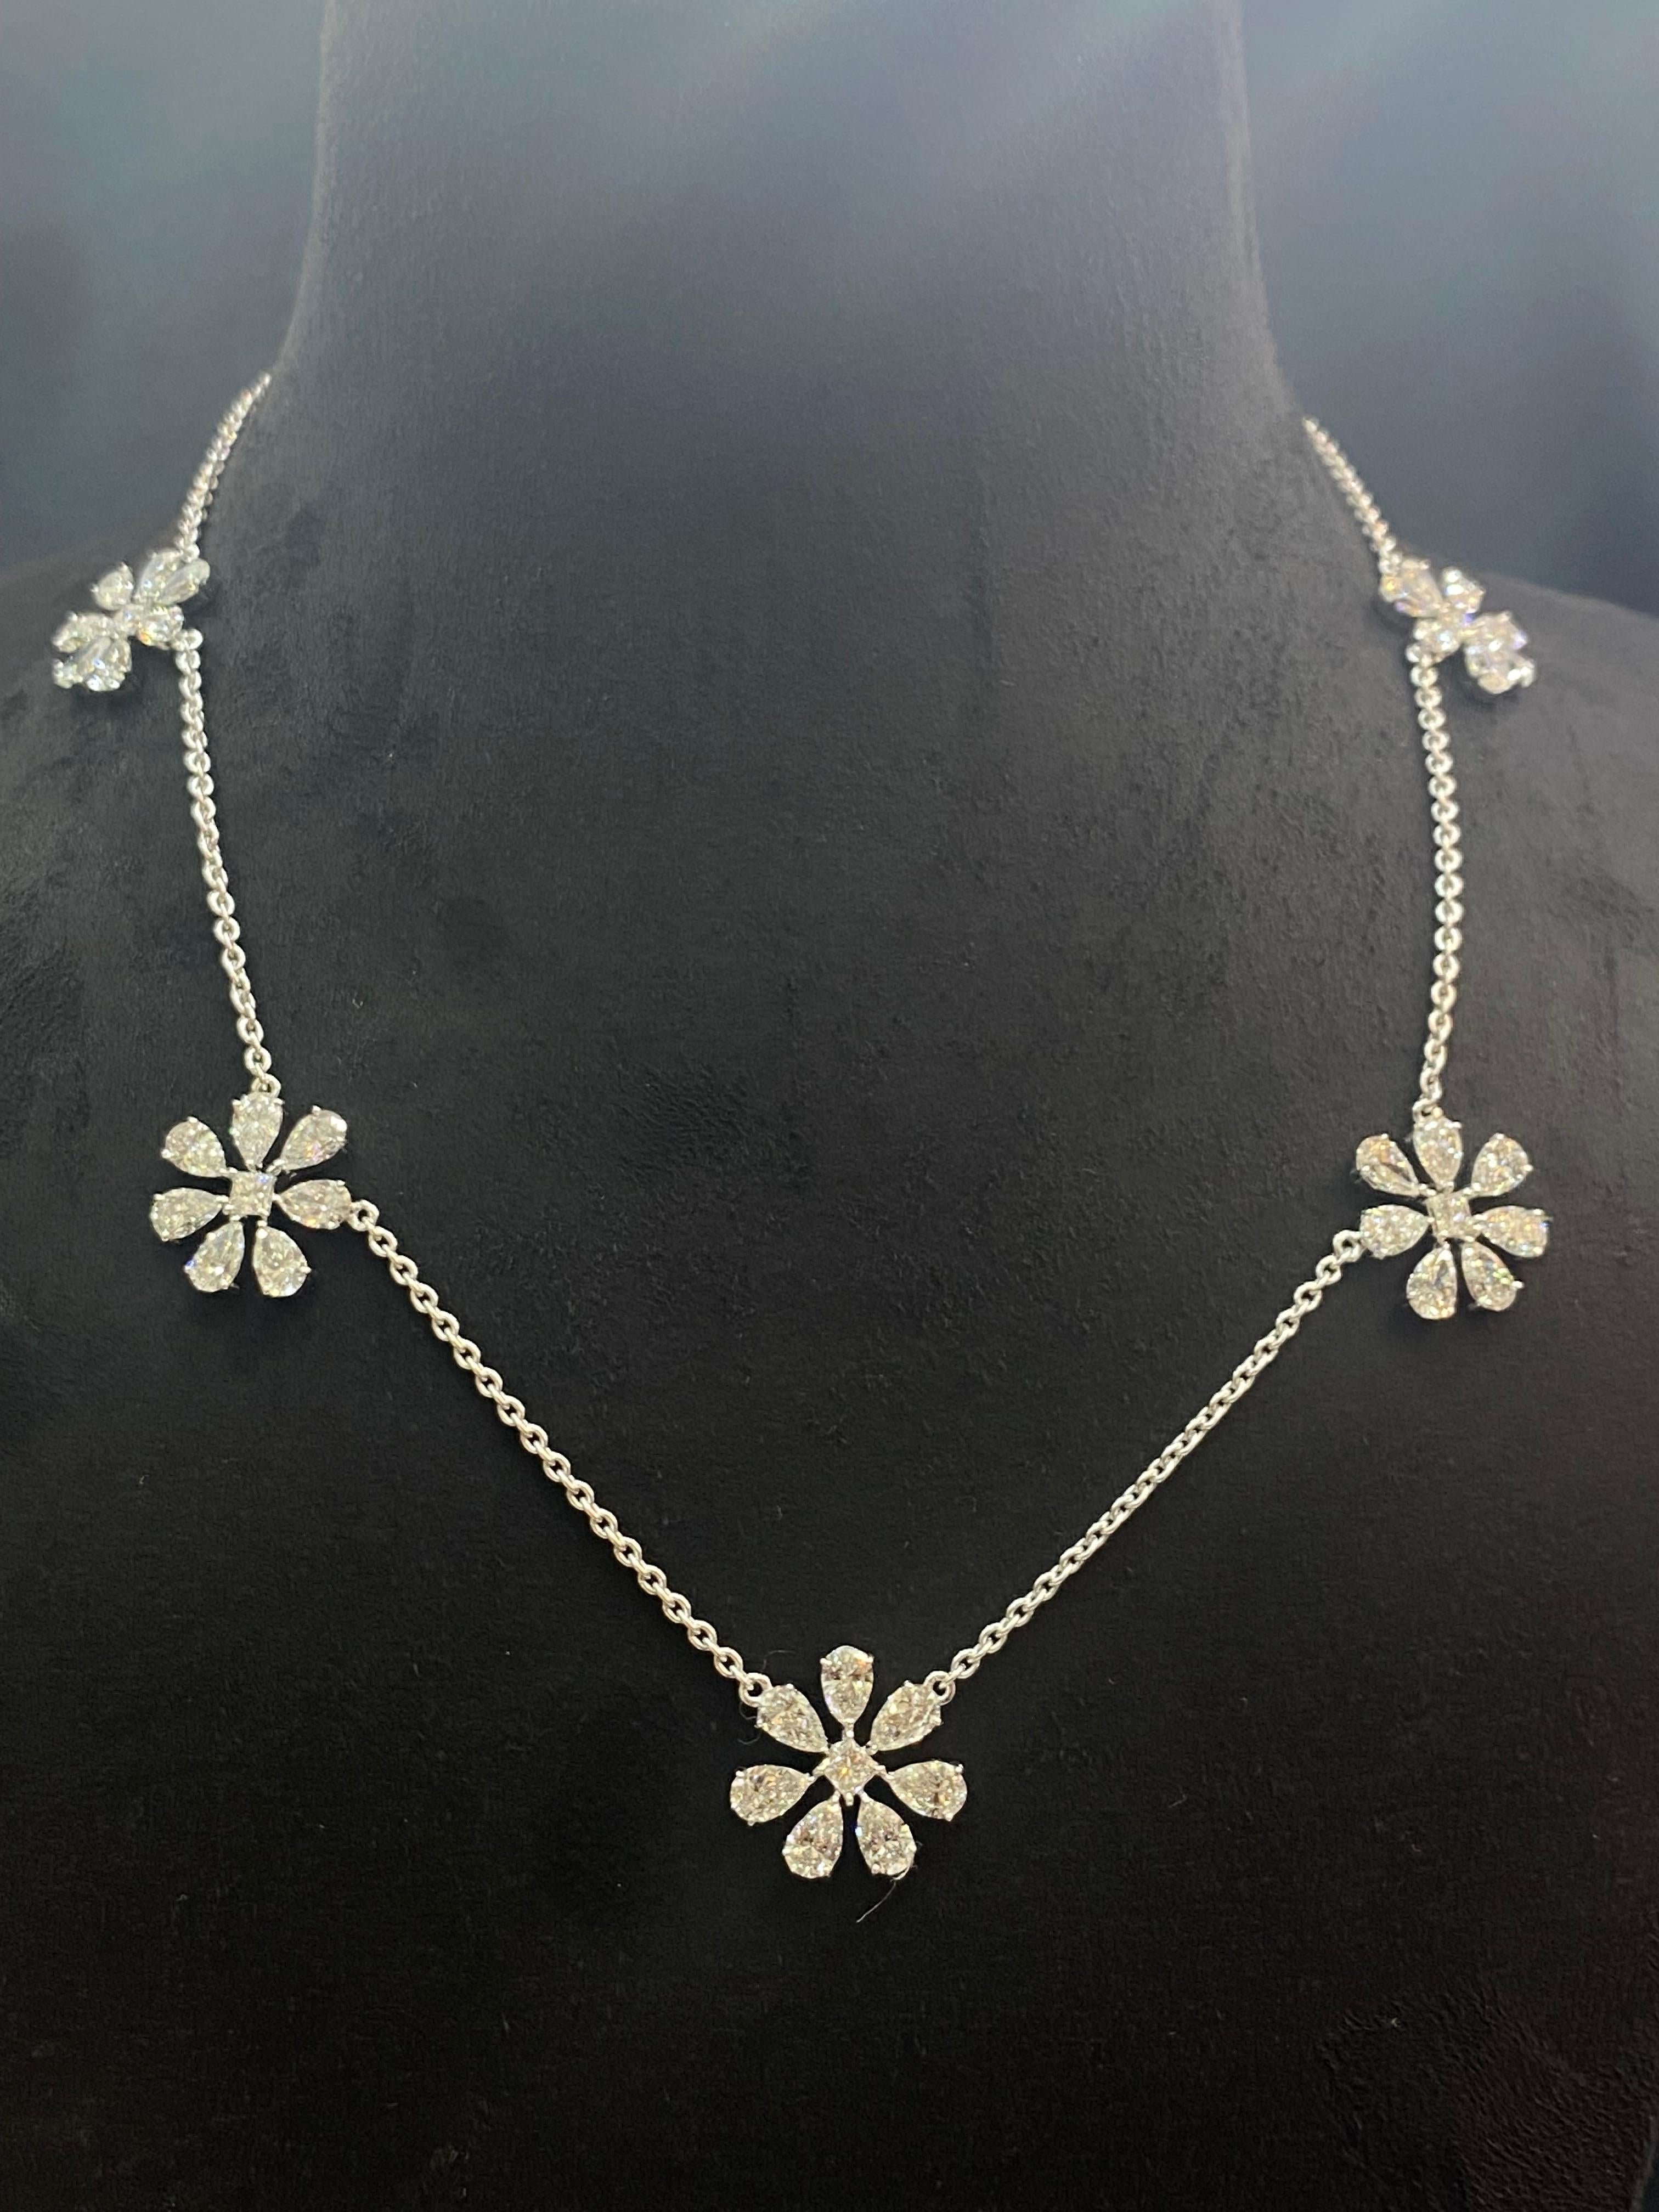 Stand out as the radiant bride you are with this exquisite 11.25 carat Pear Princess diamond floral necklace, designed to add unparalleled brilliance to your special day!

Specifications : 

Diamond Weight : 11.25 Cts [10.50 Cts Pear + 0.75 Cts